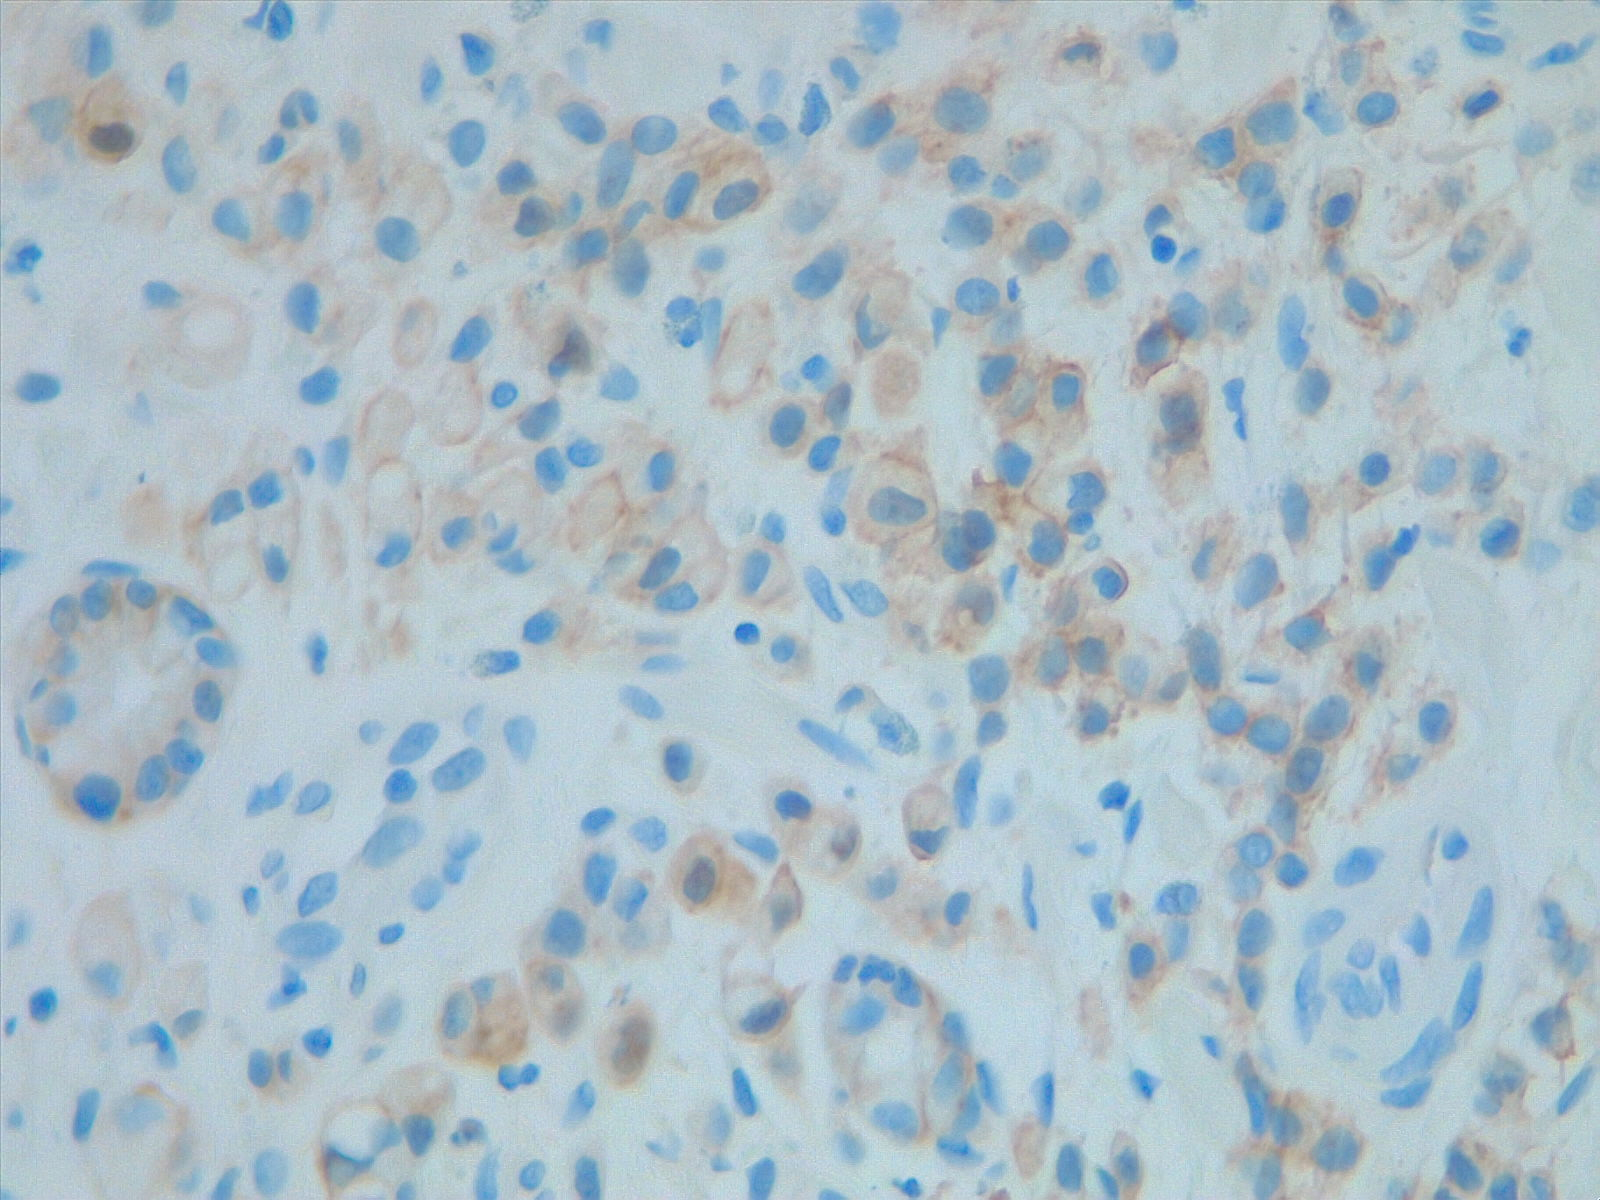 Prognostic and predictive HER2 analysis is crucial for gastric cancer treatment. Correct HER2 evaluation can select patients for target-treatment. Here, immunohistochemistry is performed and graded as 1+ ("staining is weak or detected in only one part of the membrane of at least 5 cohesive cells")